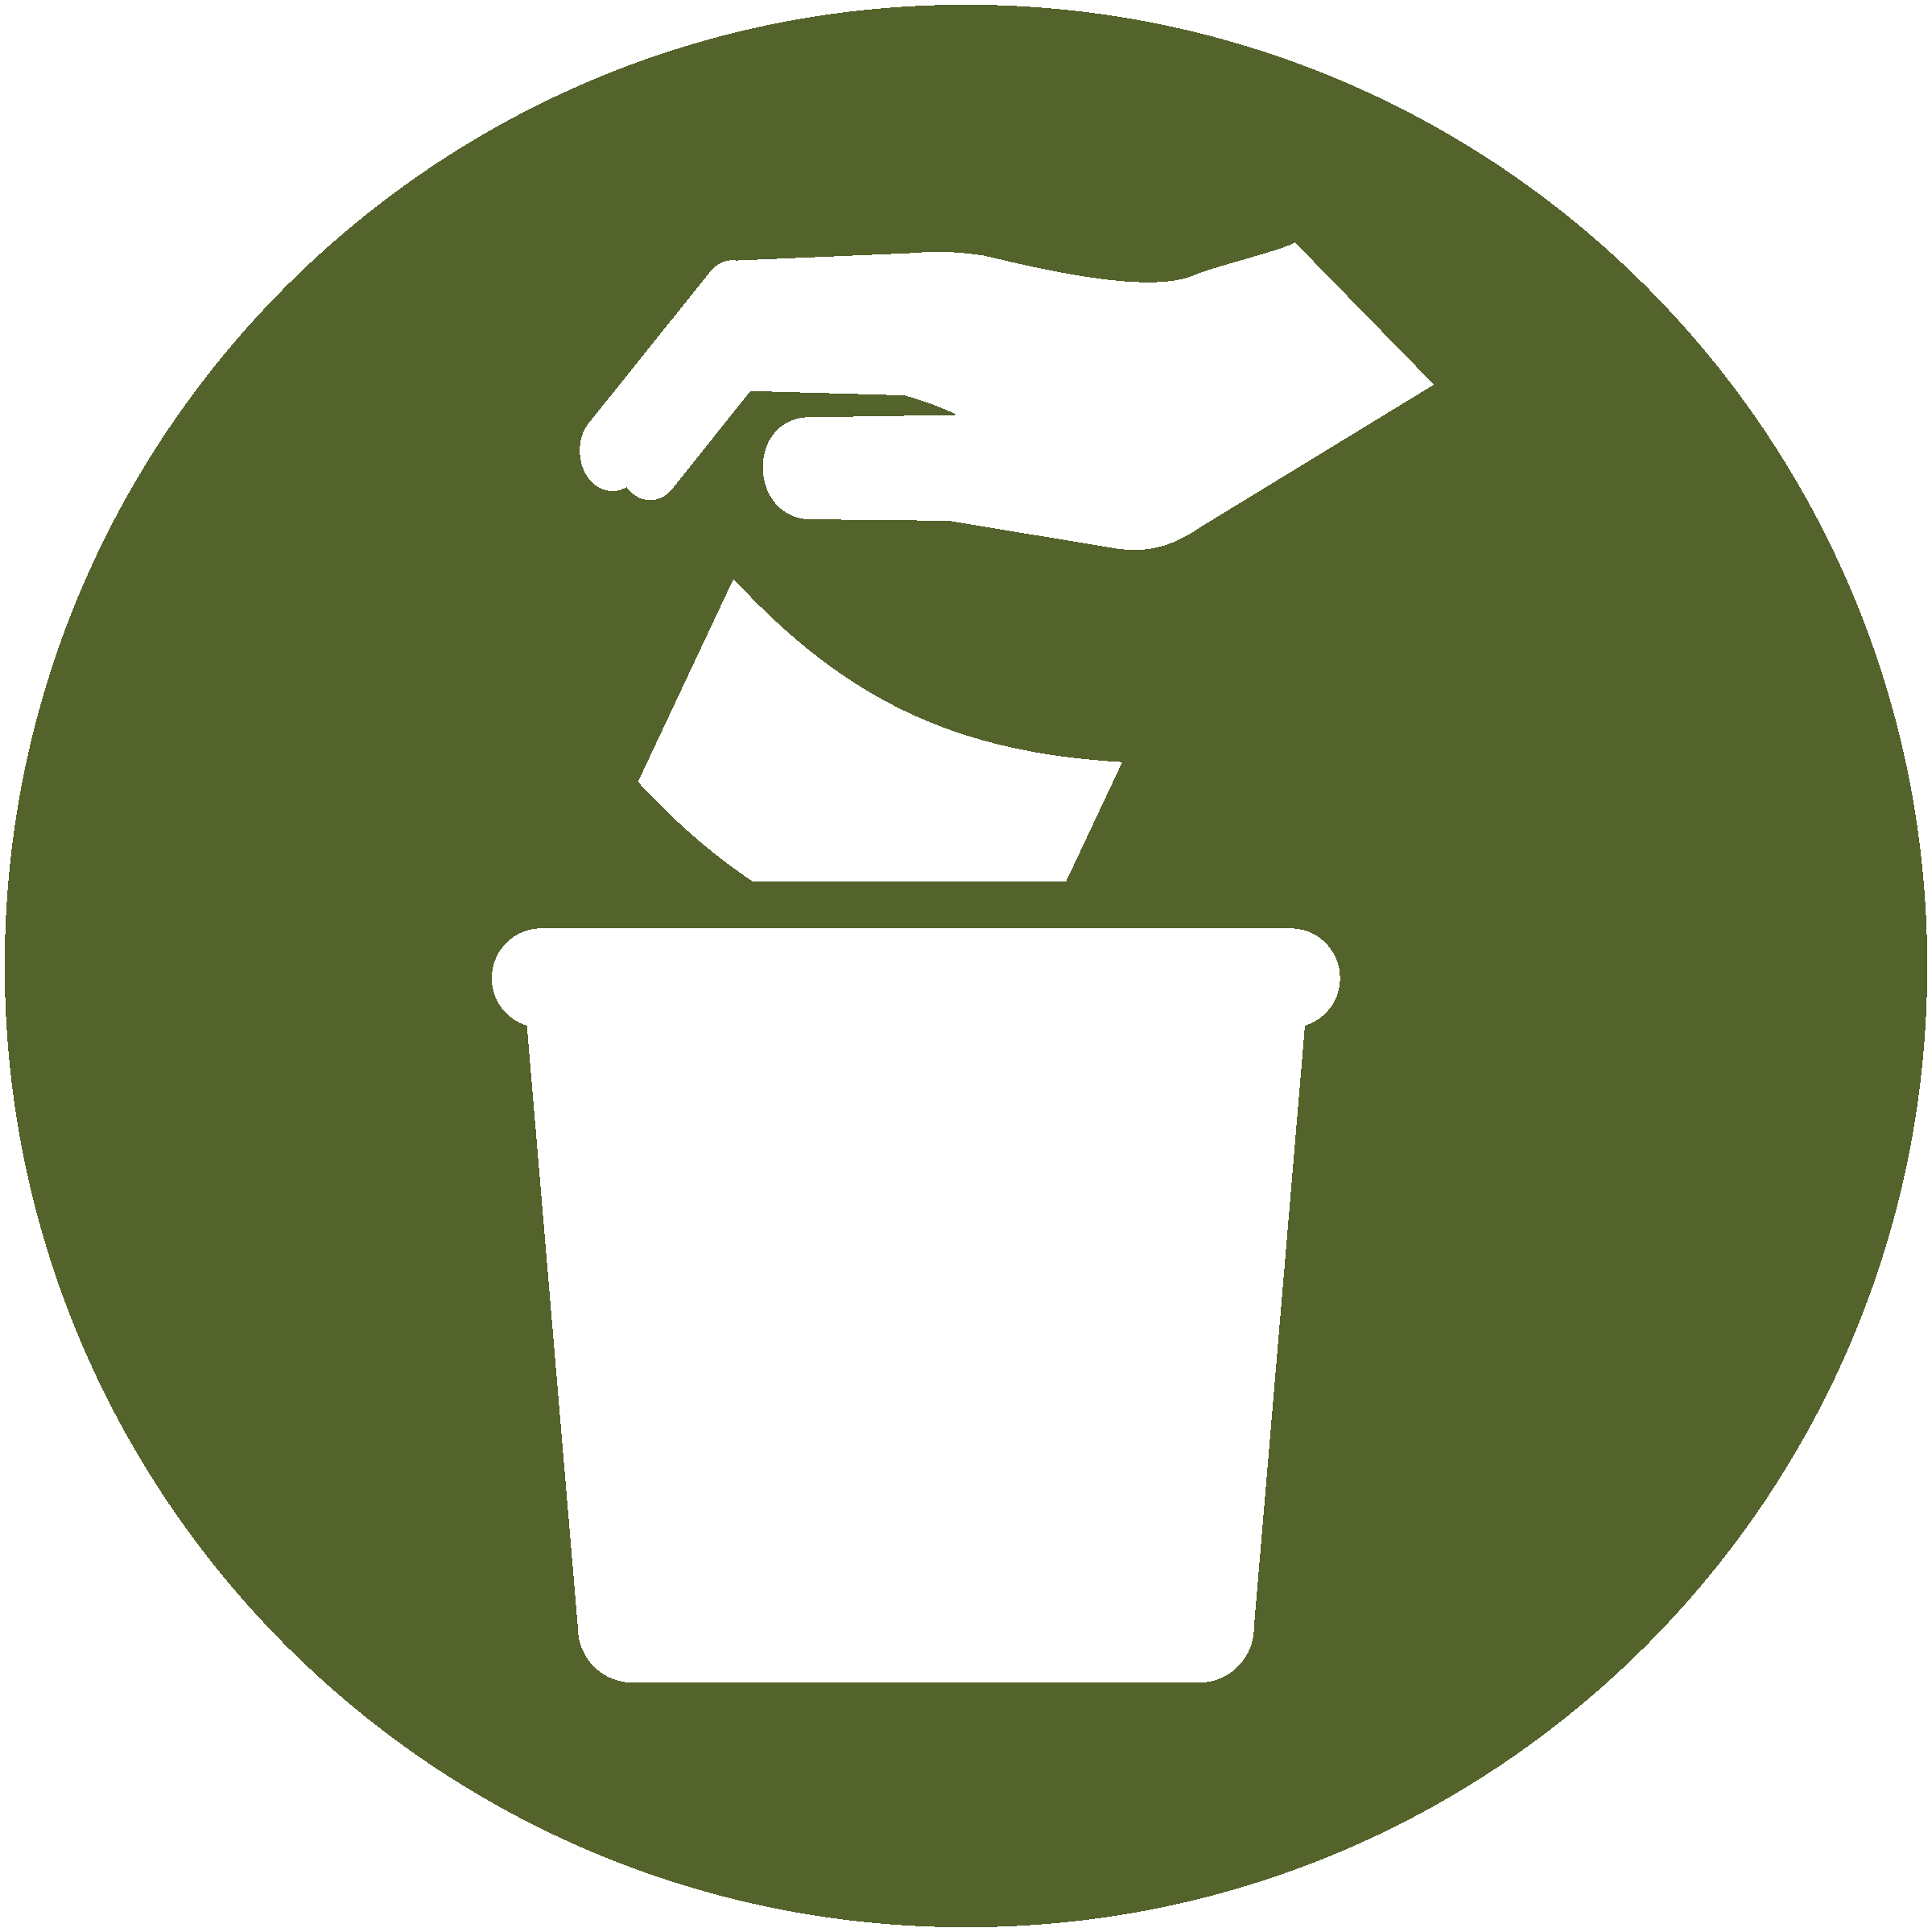 icon of hand throwing item into receptacle